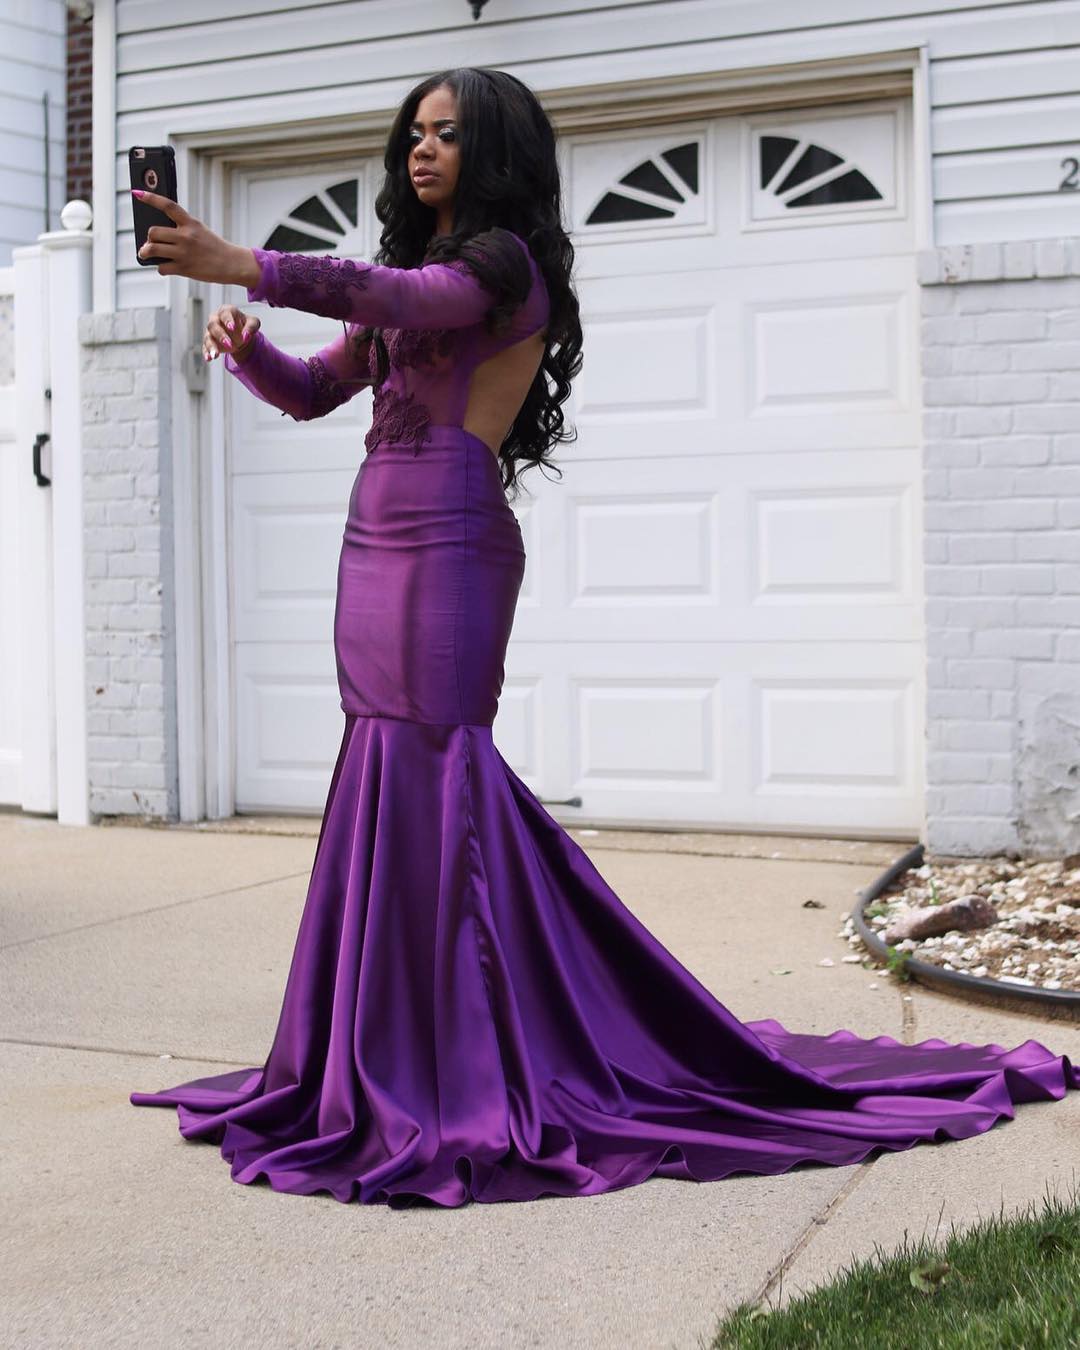 Newest 2018 Sexy Purple Prom Dresses For Black Girl Open Back Illusion Bodice Mermaid Evening Party Gowns